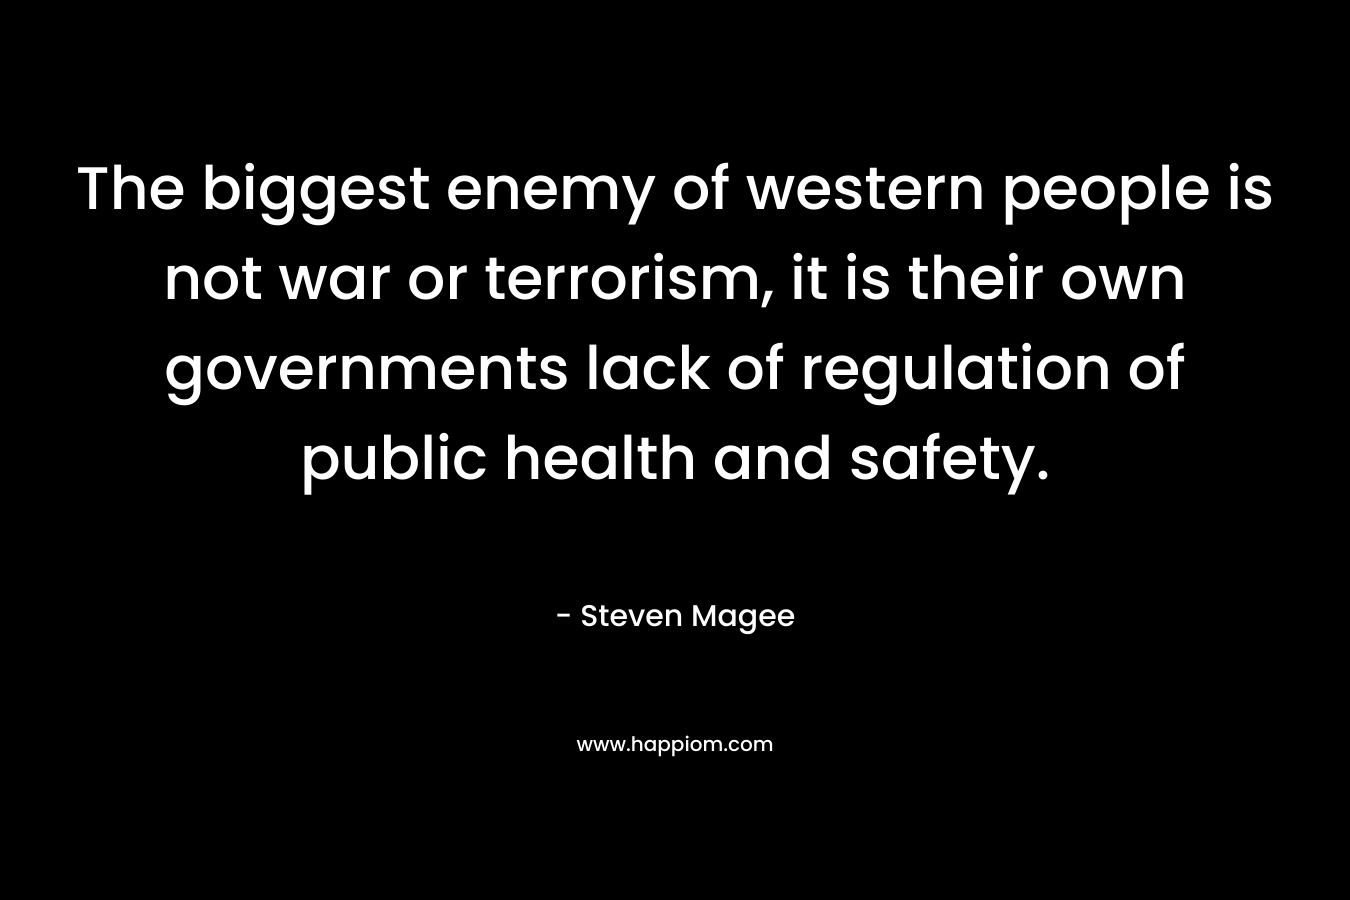 The biggest enemy of western people is not war or terrorism, it is their own governments lack of regulation of public health and safety. – Steven Magee